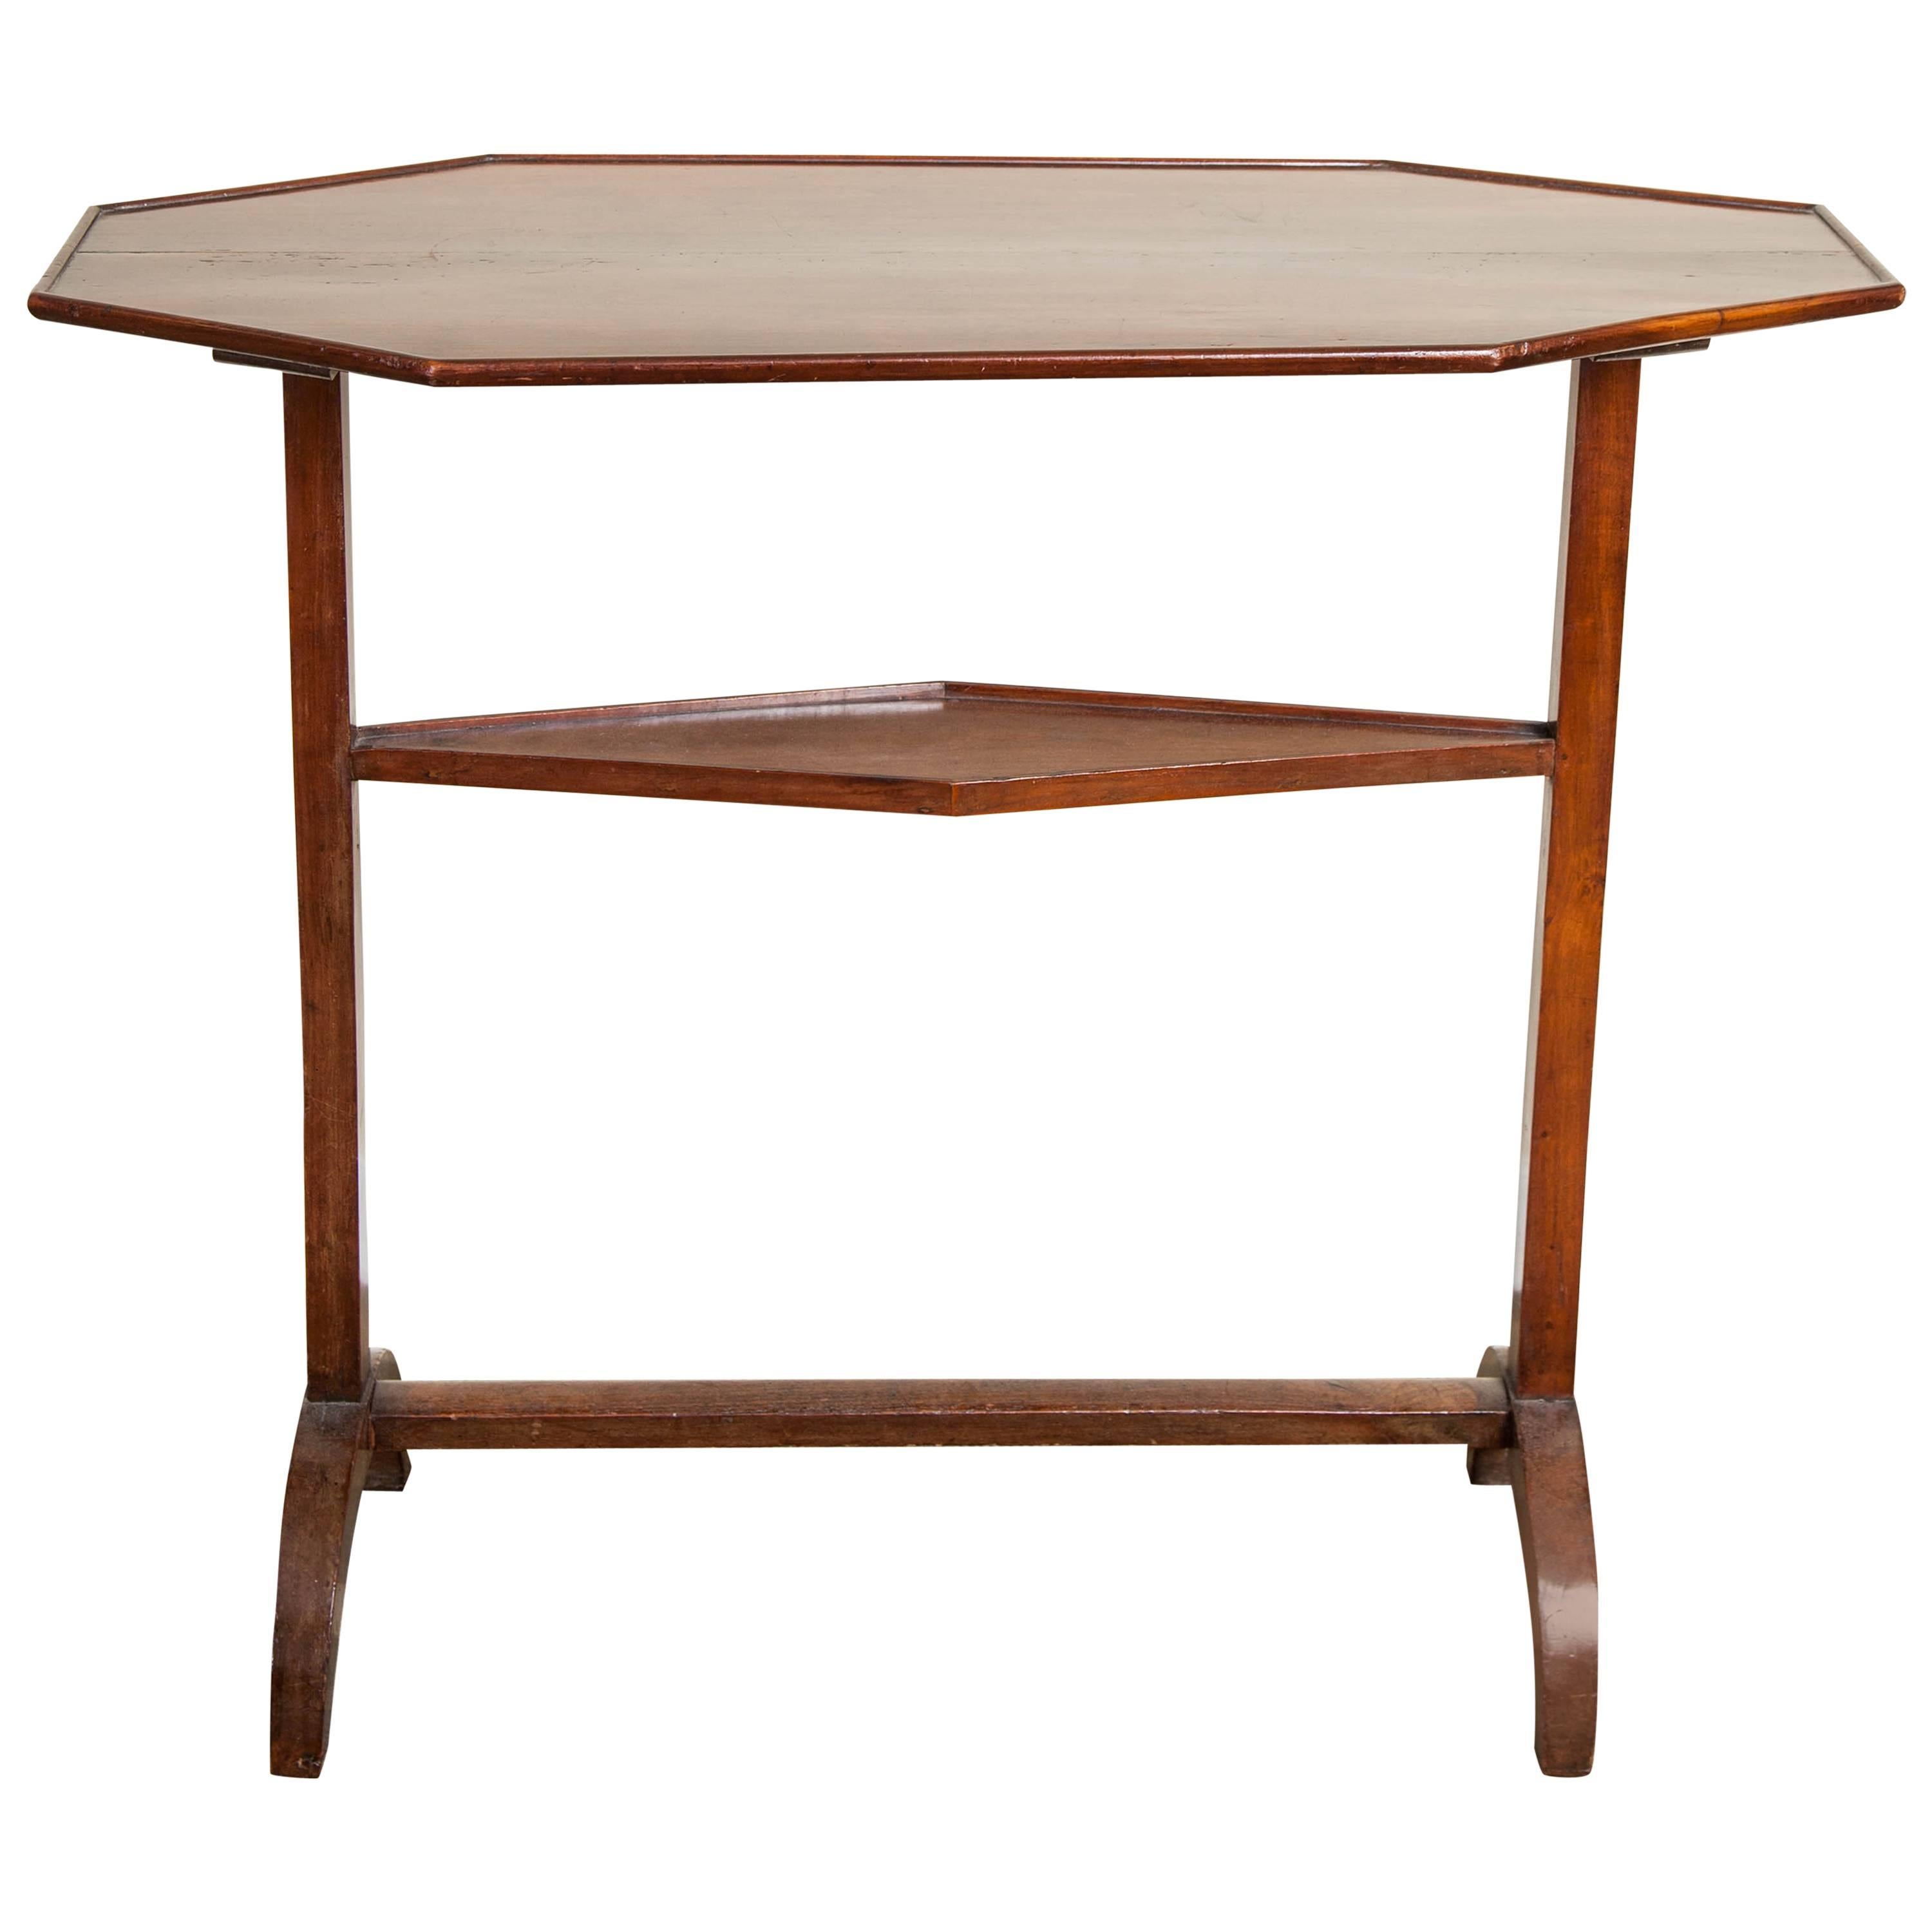 Directoire Mahogany Trestle Table, Early 19th Century For Sale